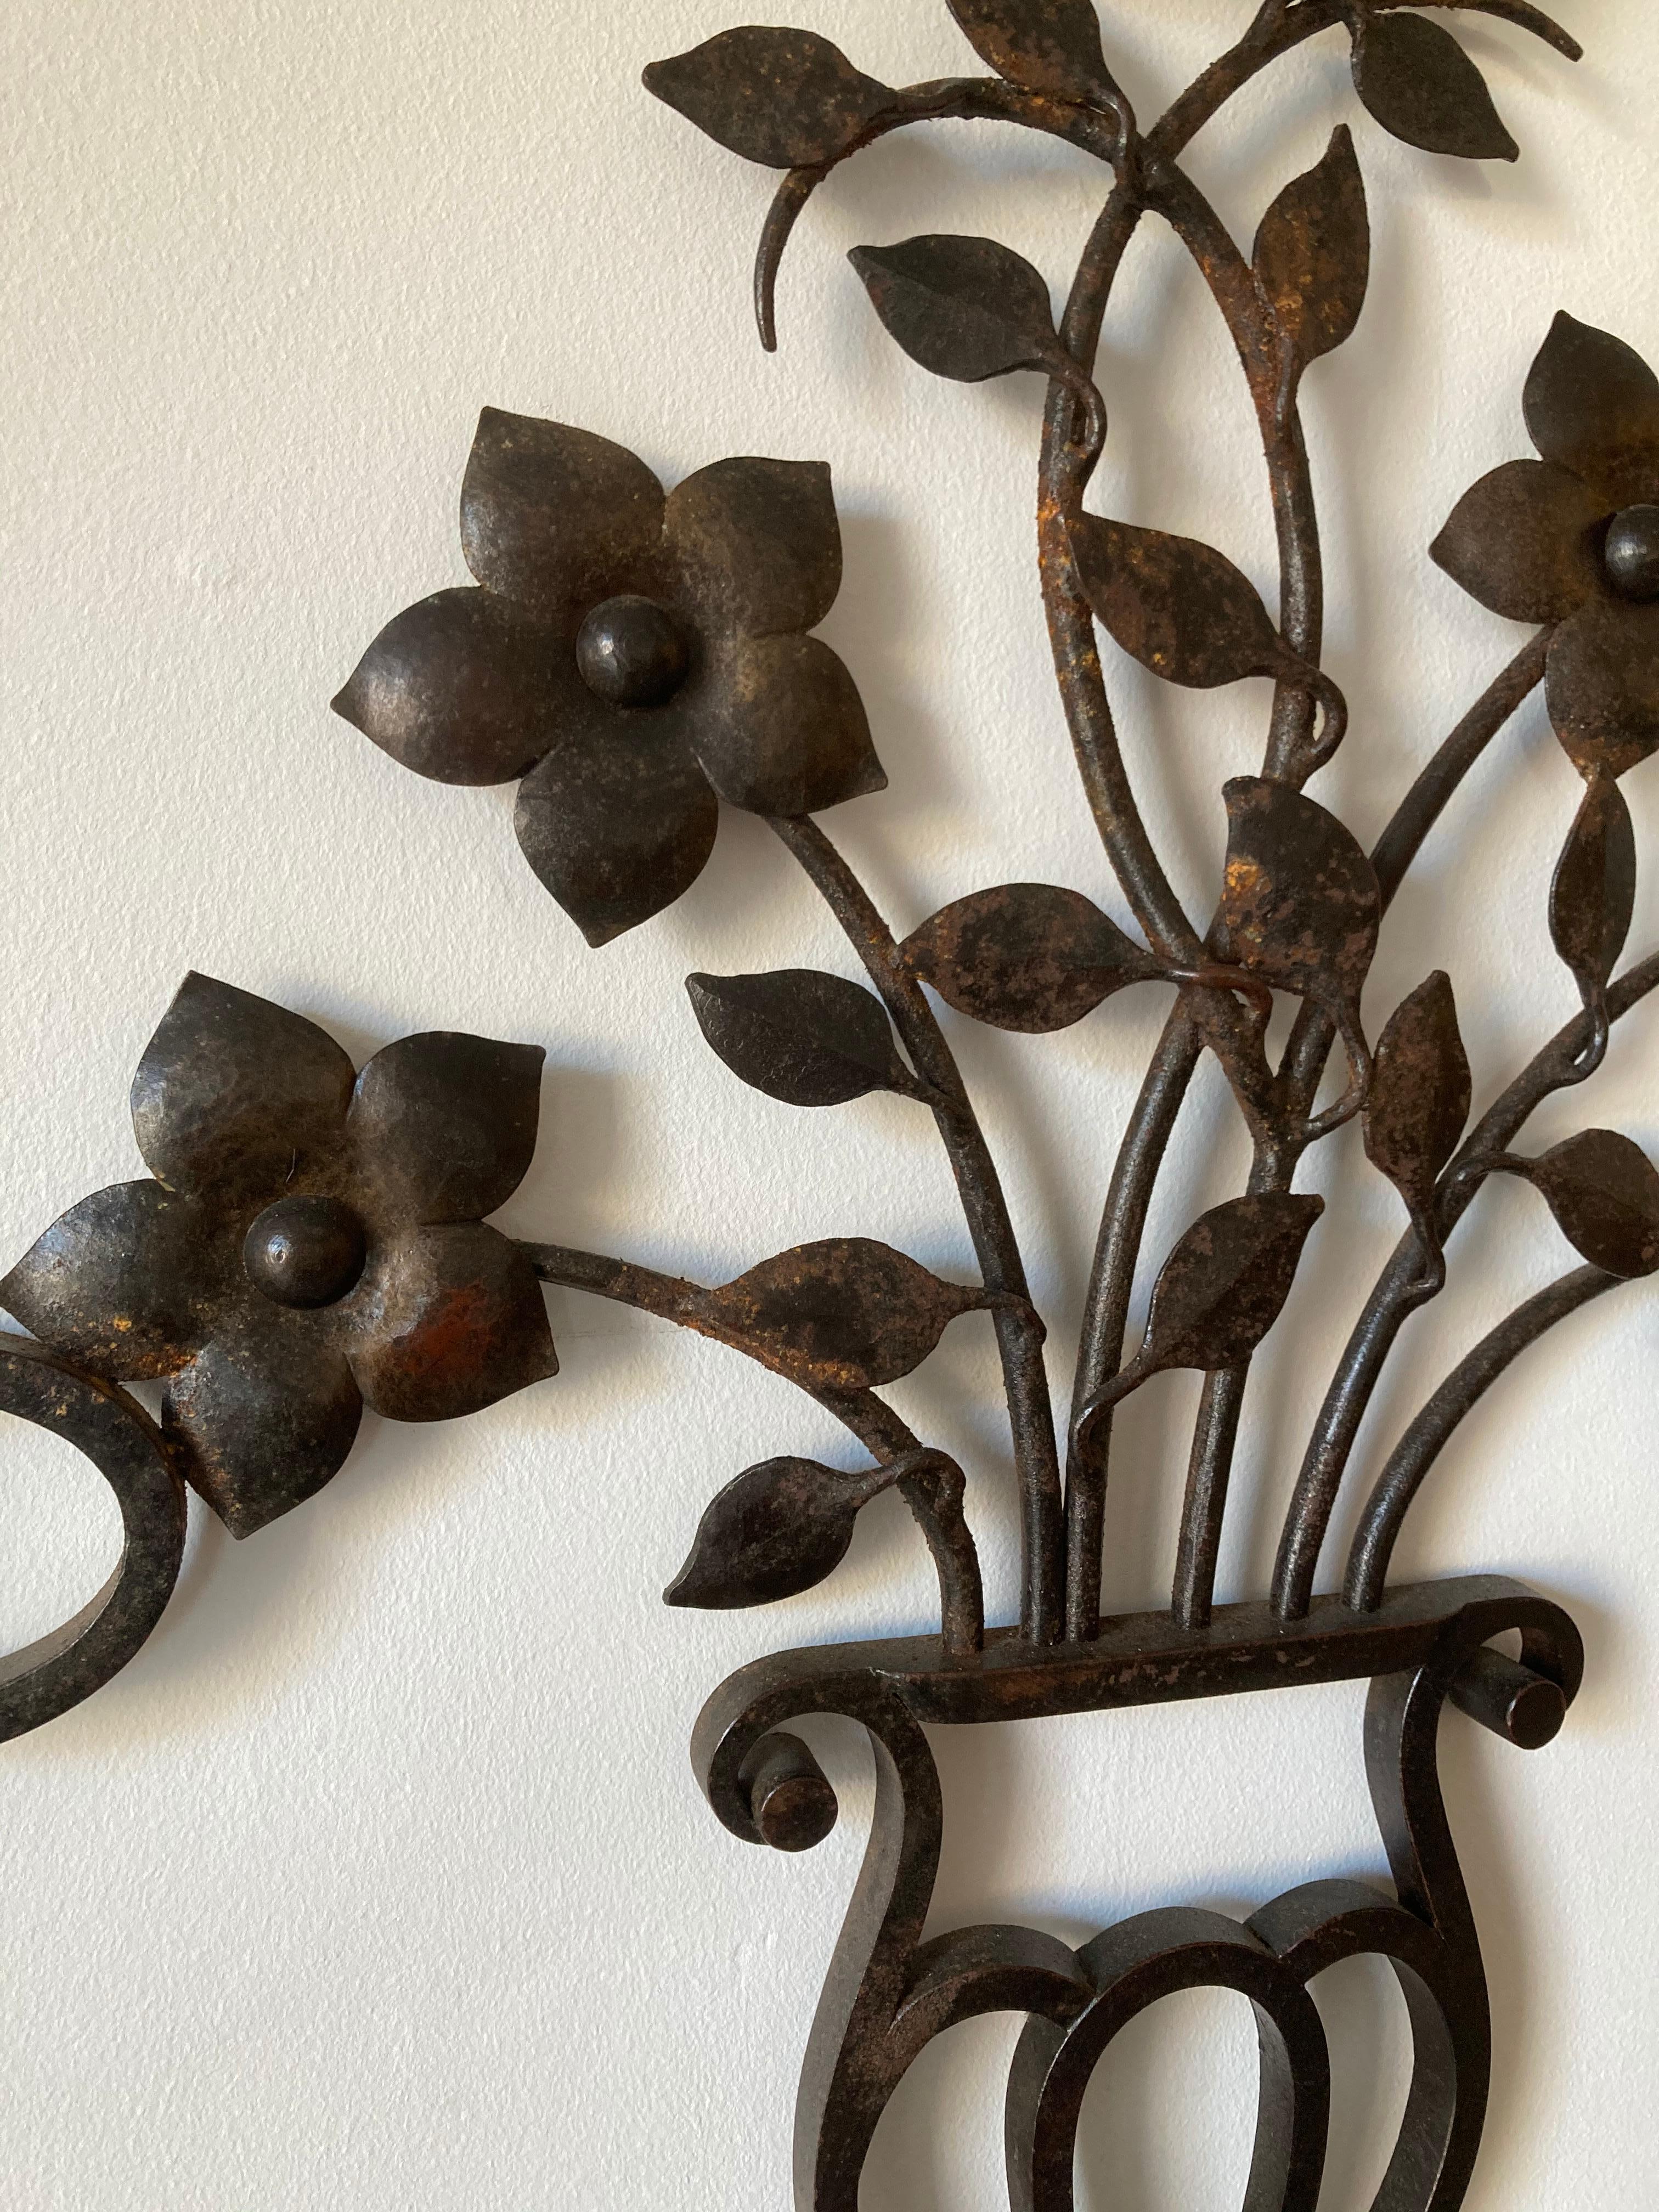 20th Century French Decorative Iron Wall Sculpture or Applique, Urn and Floral Motif For Sale